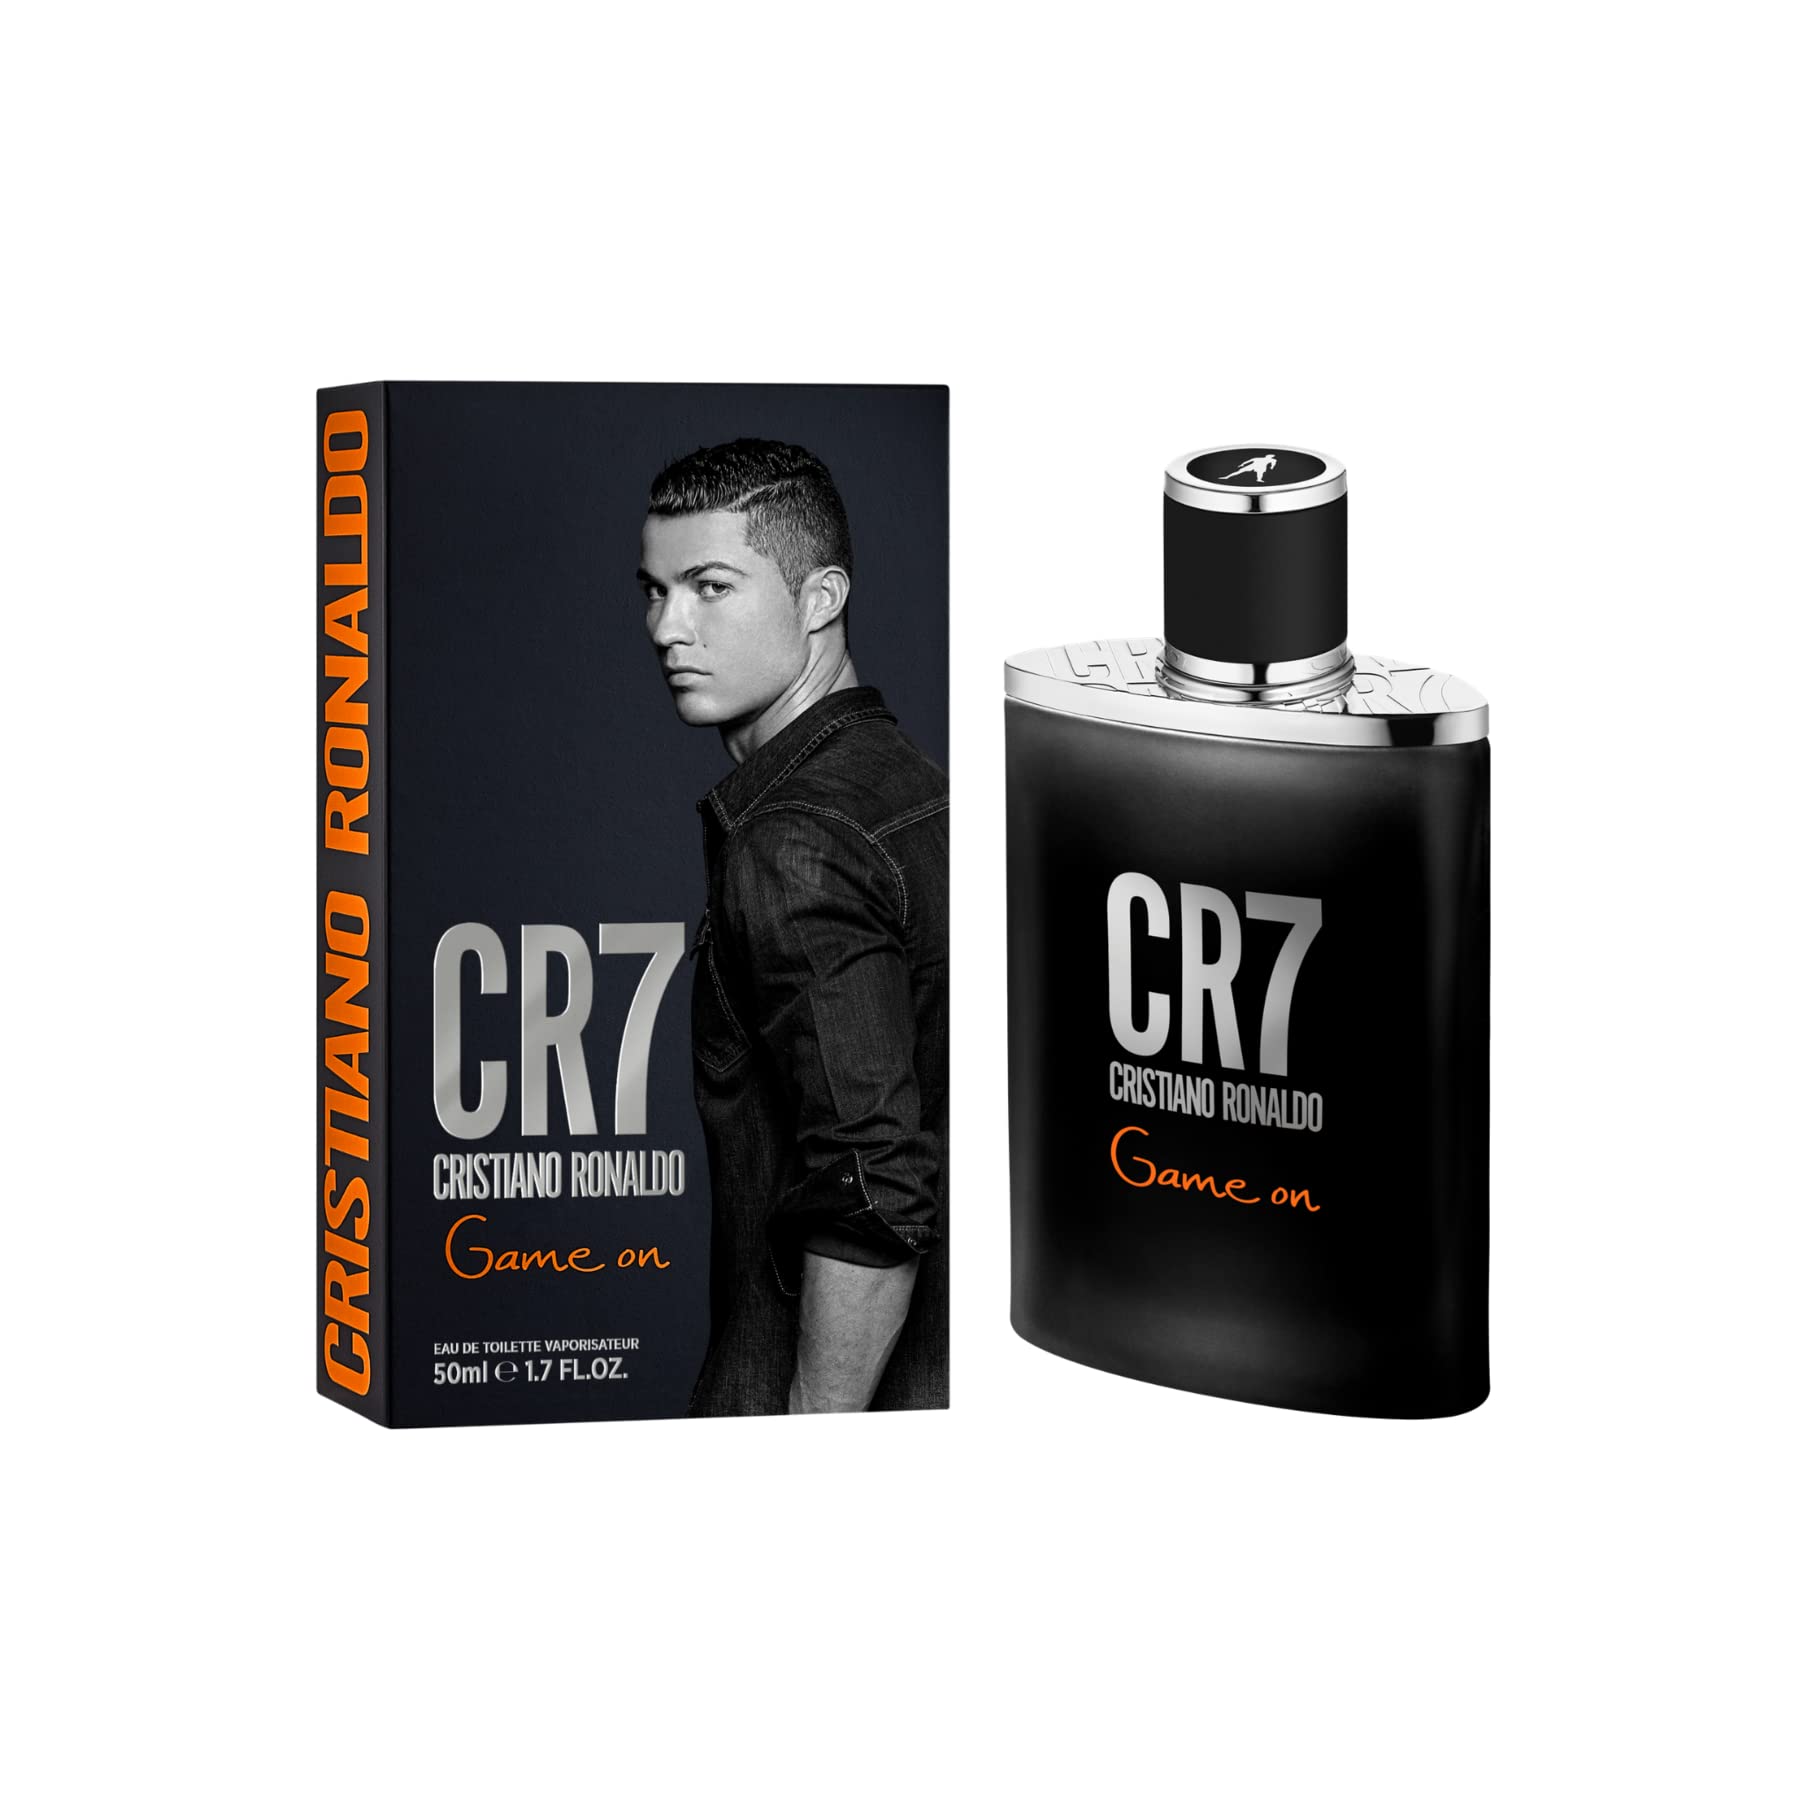 Cristiano Ronaldo CR7 - Game On Men EDT Spray - Daily Use Woody Aromatic Fruity Fragrance Cologne With Blend of Apple, Lavender & Cedarwood - 1.7 oz